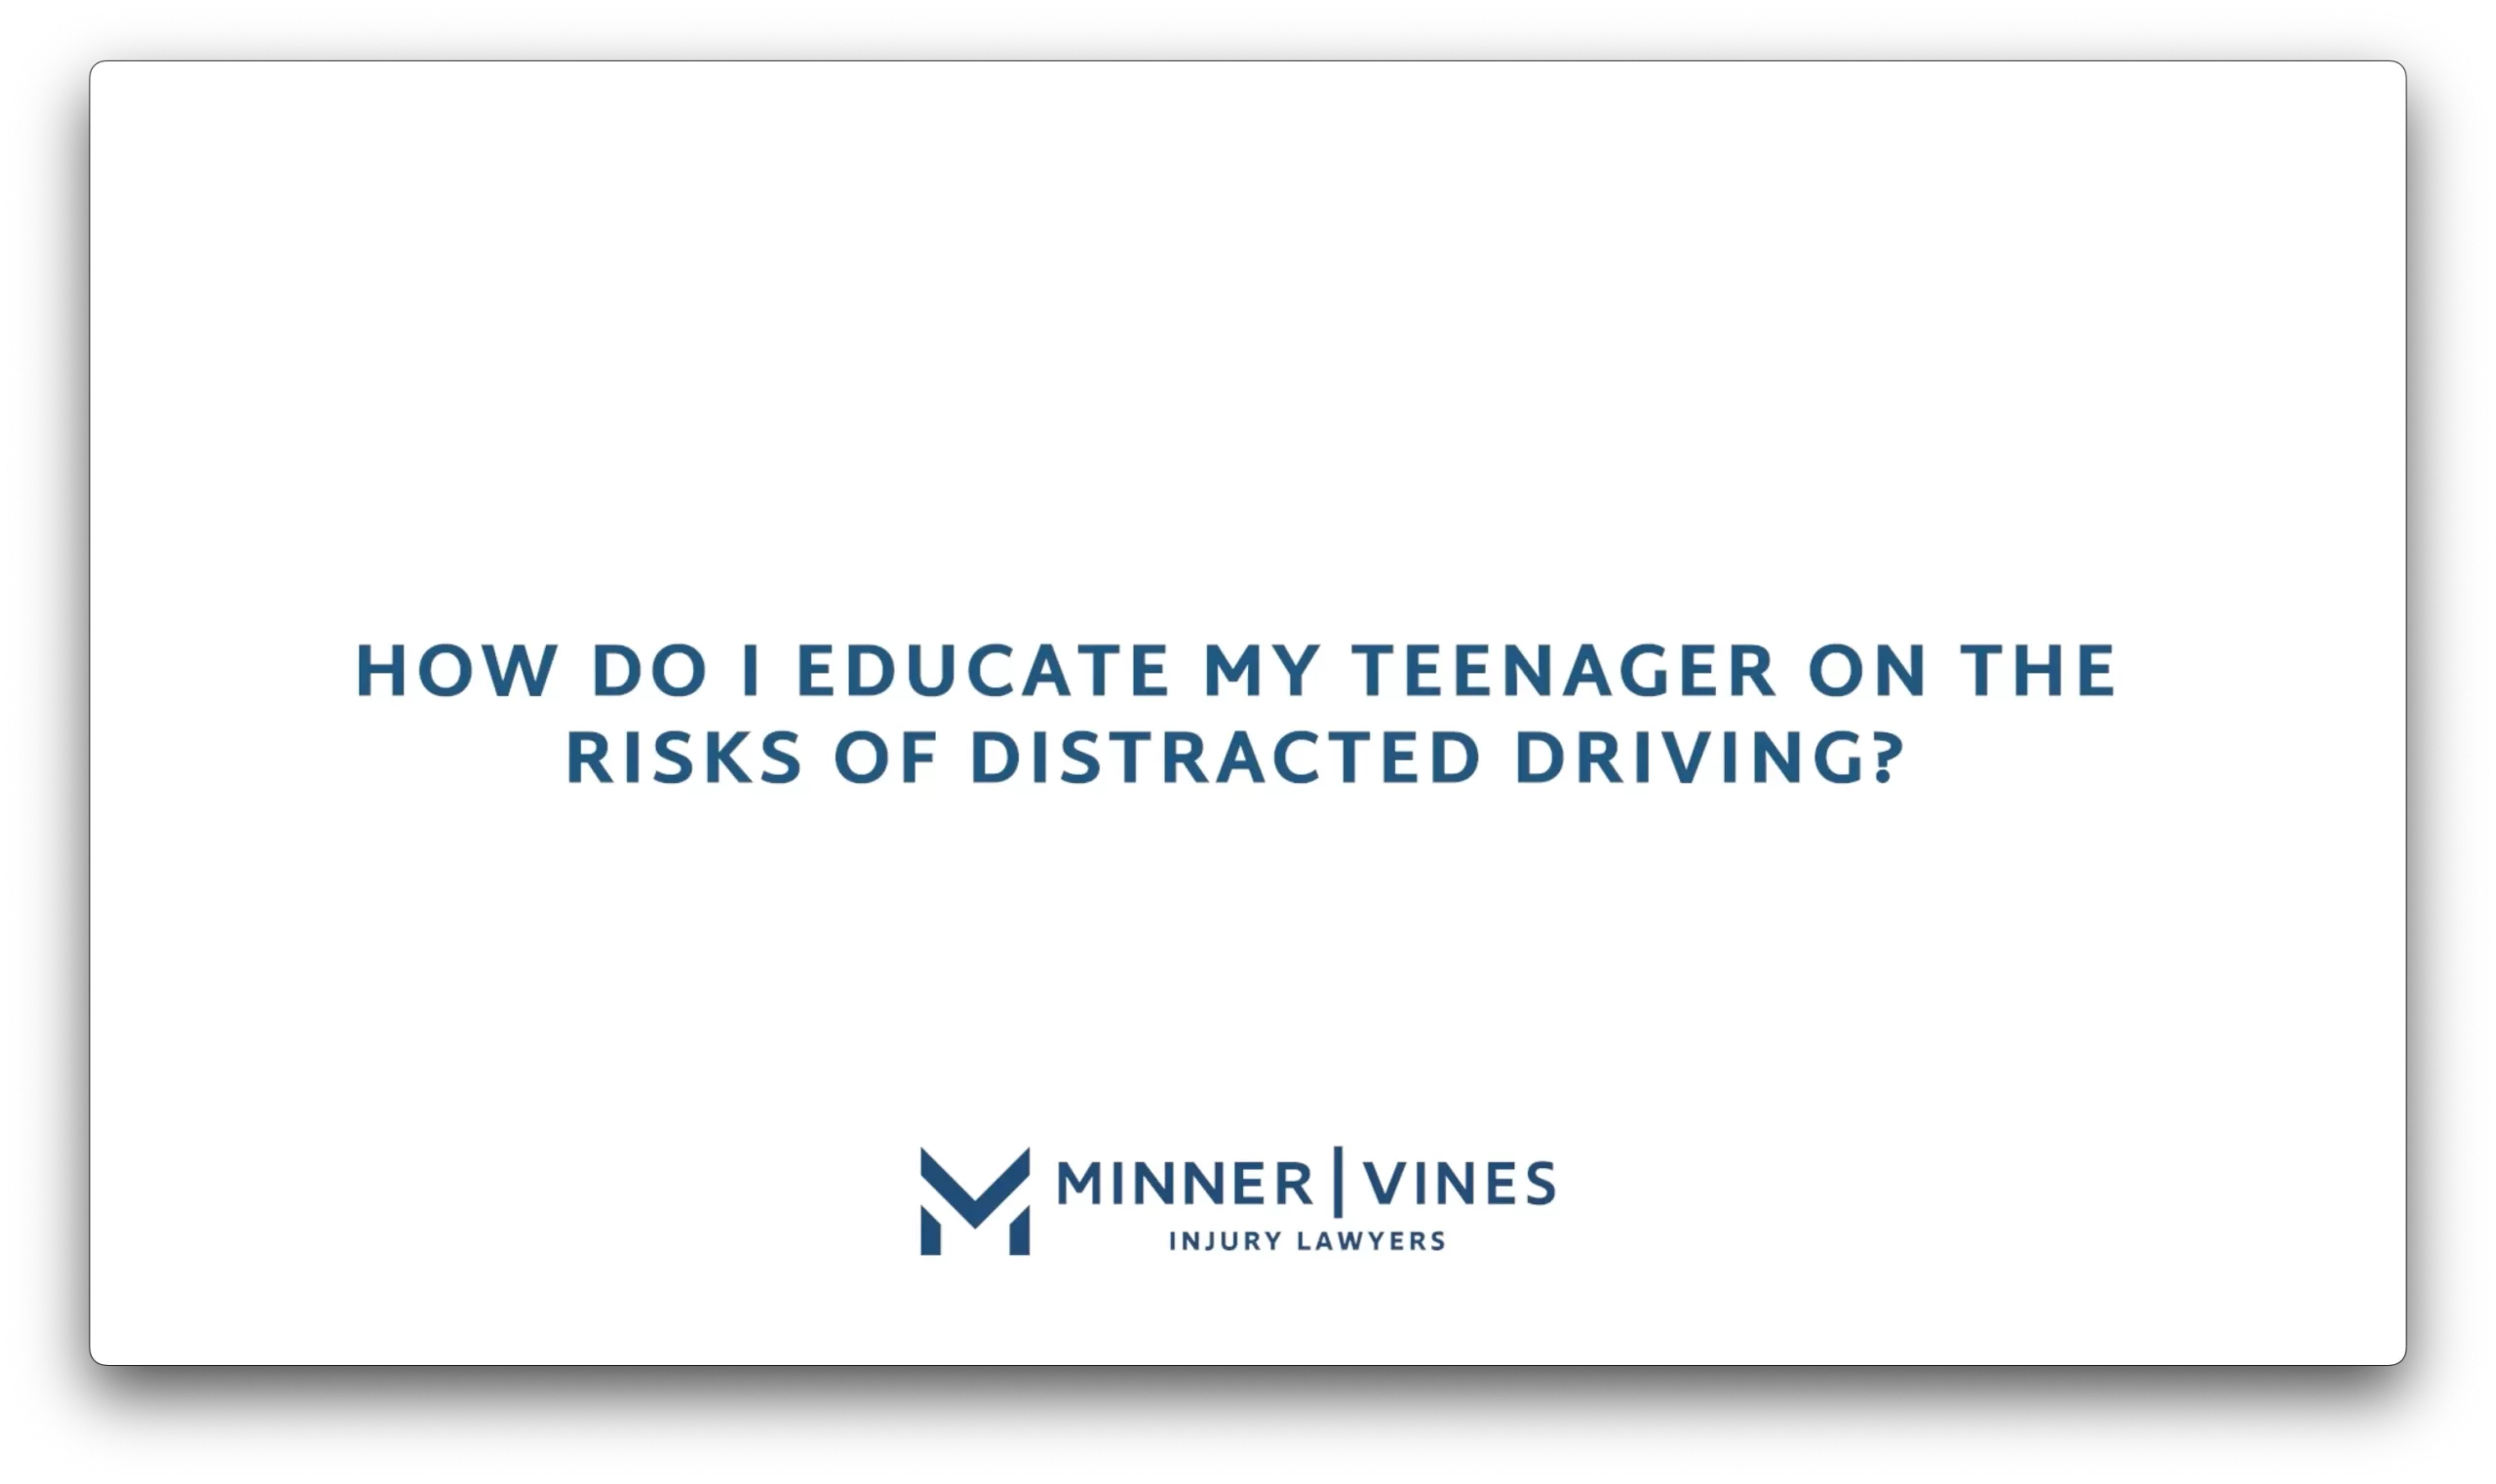 How do I educate my teenager on the risks of distracted driving?